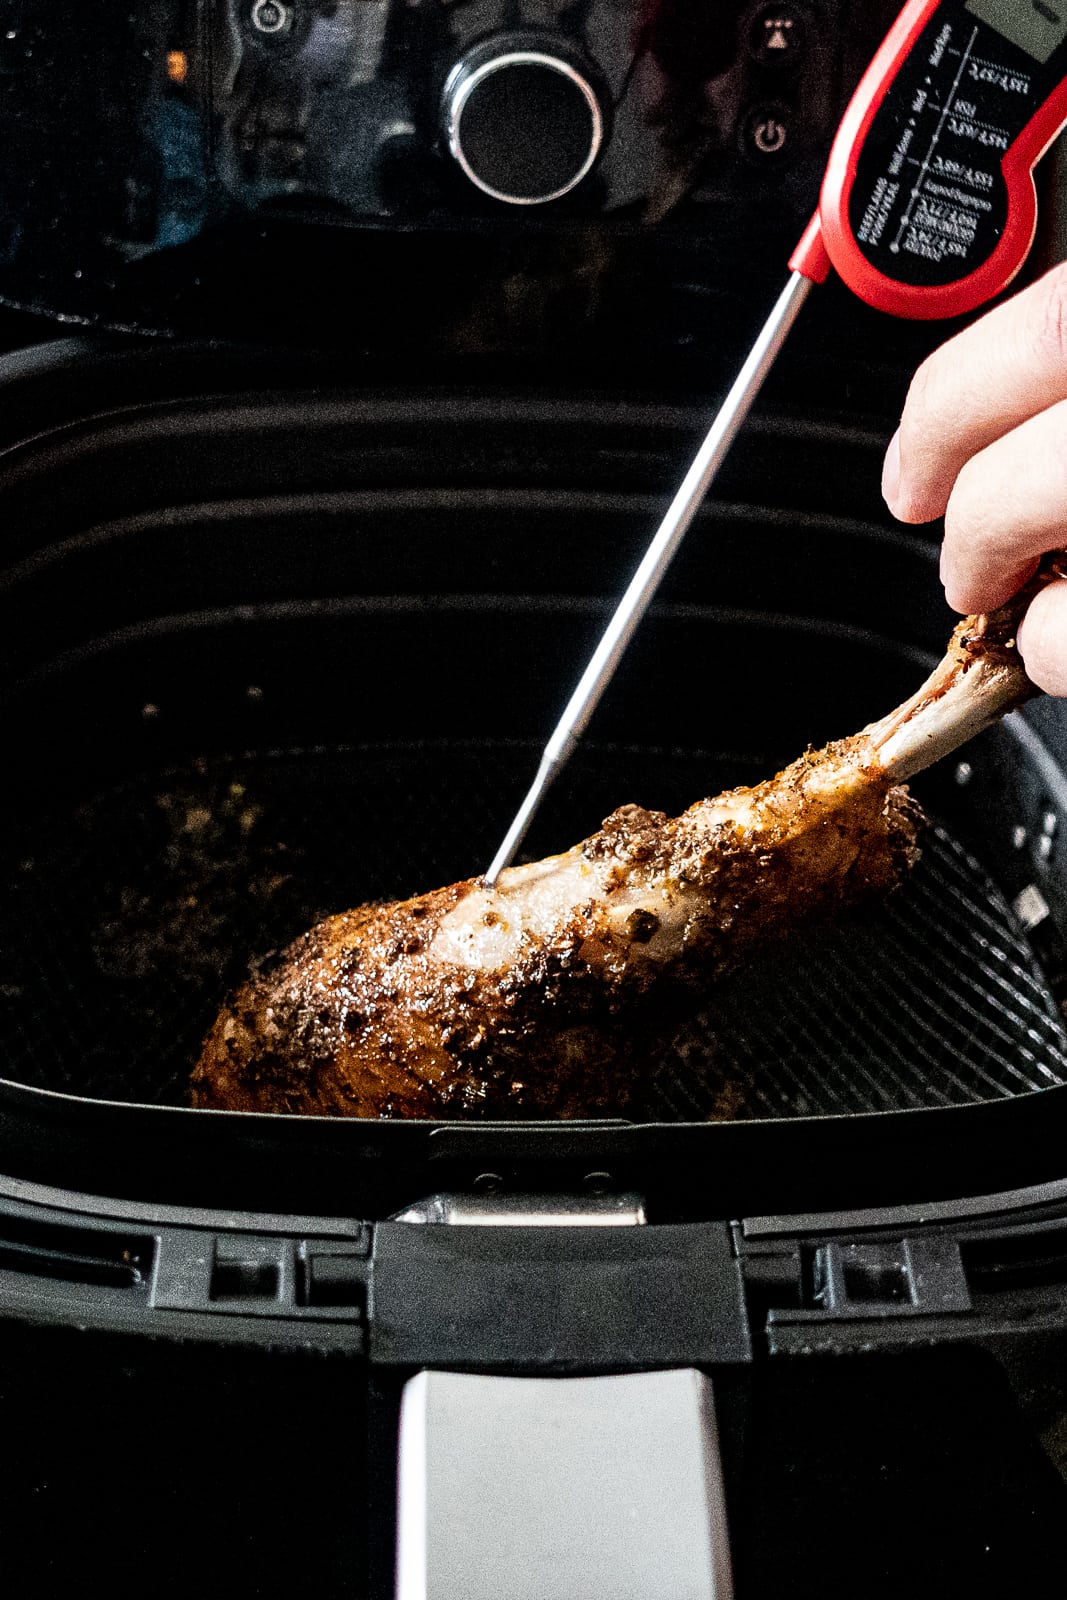 Taking the Air Fryer Turkey Legs Done Temperature with an internal read thermometer